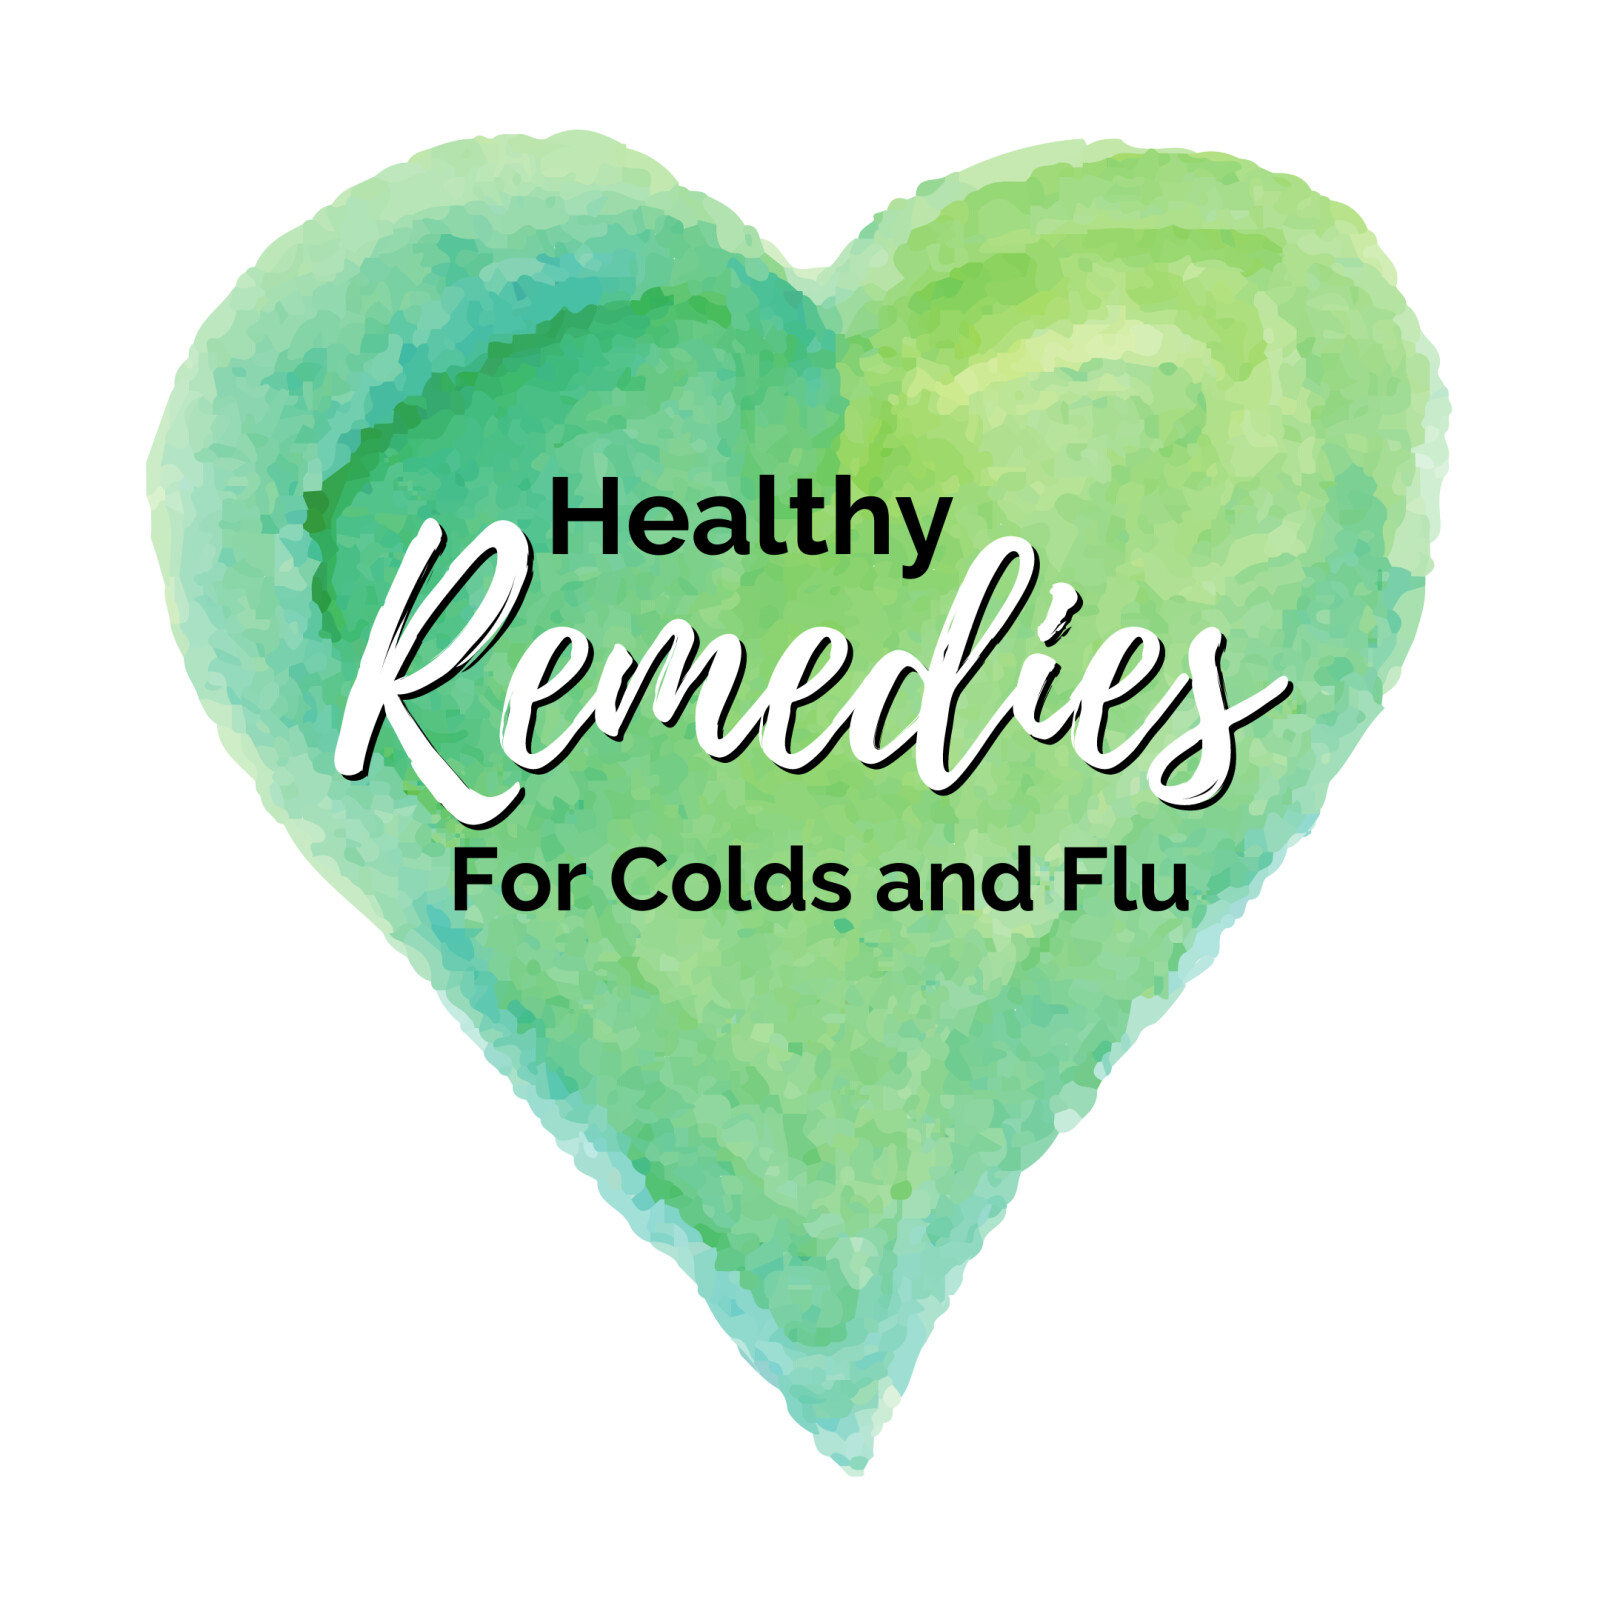 Healthy Remedies for Colds and Flu